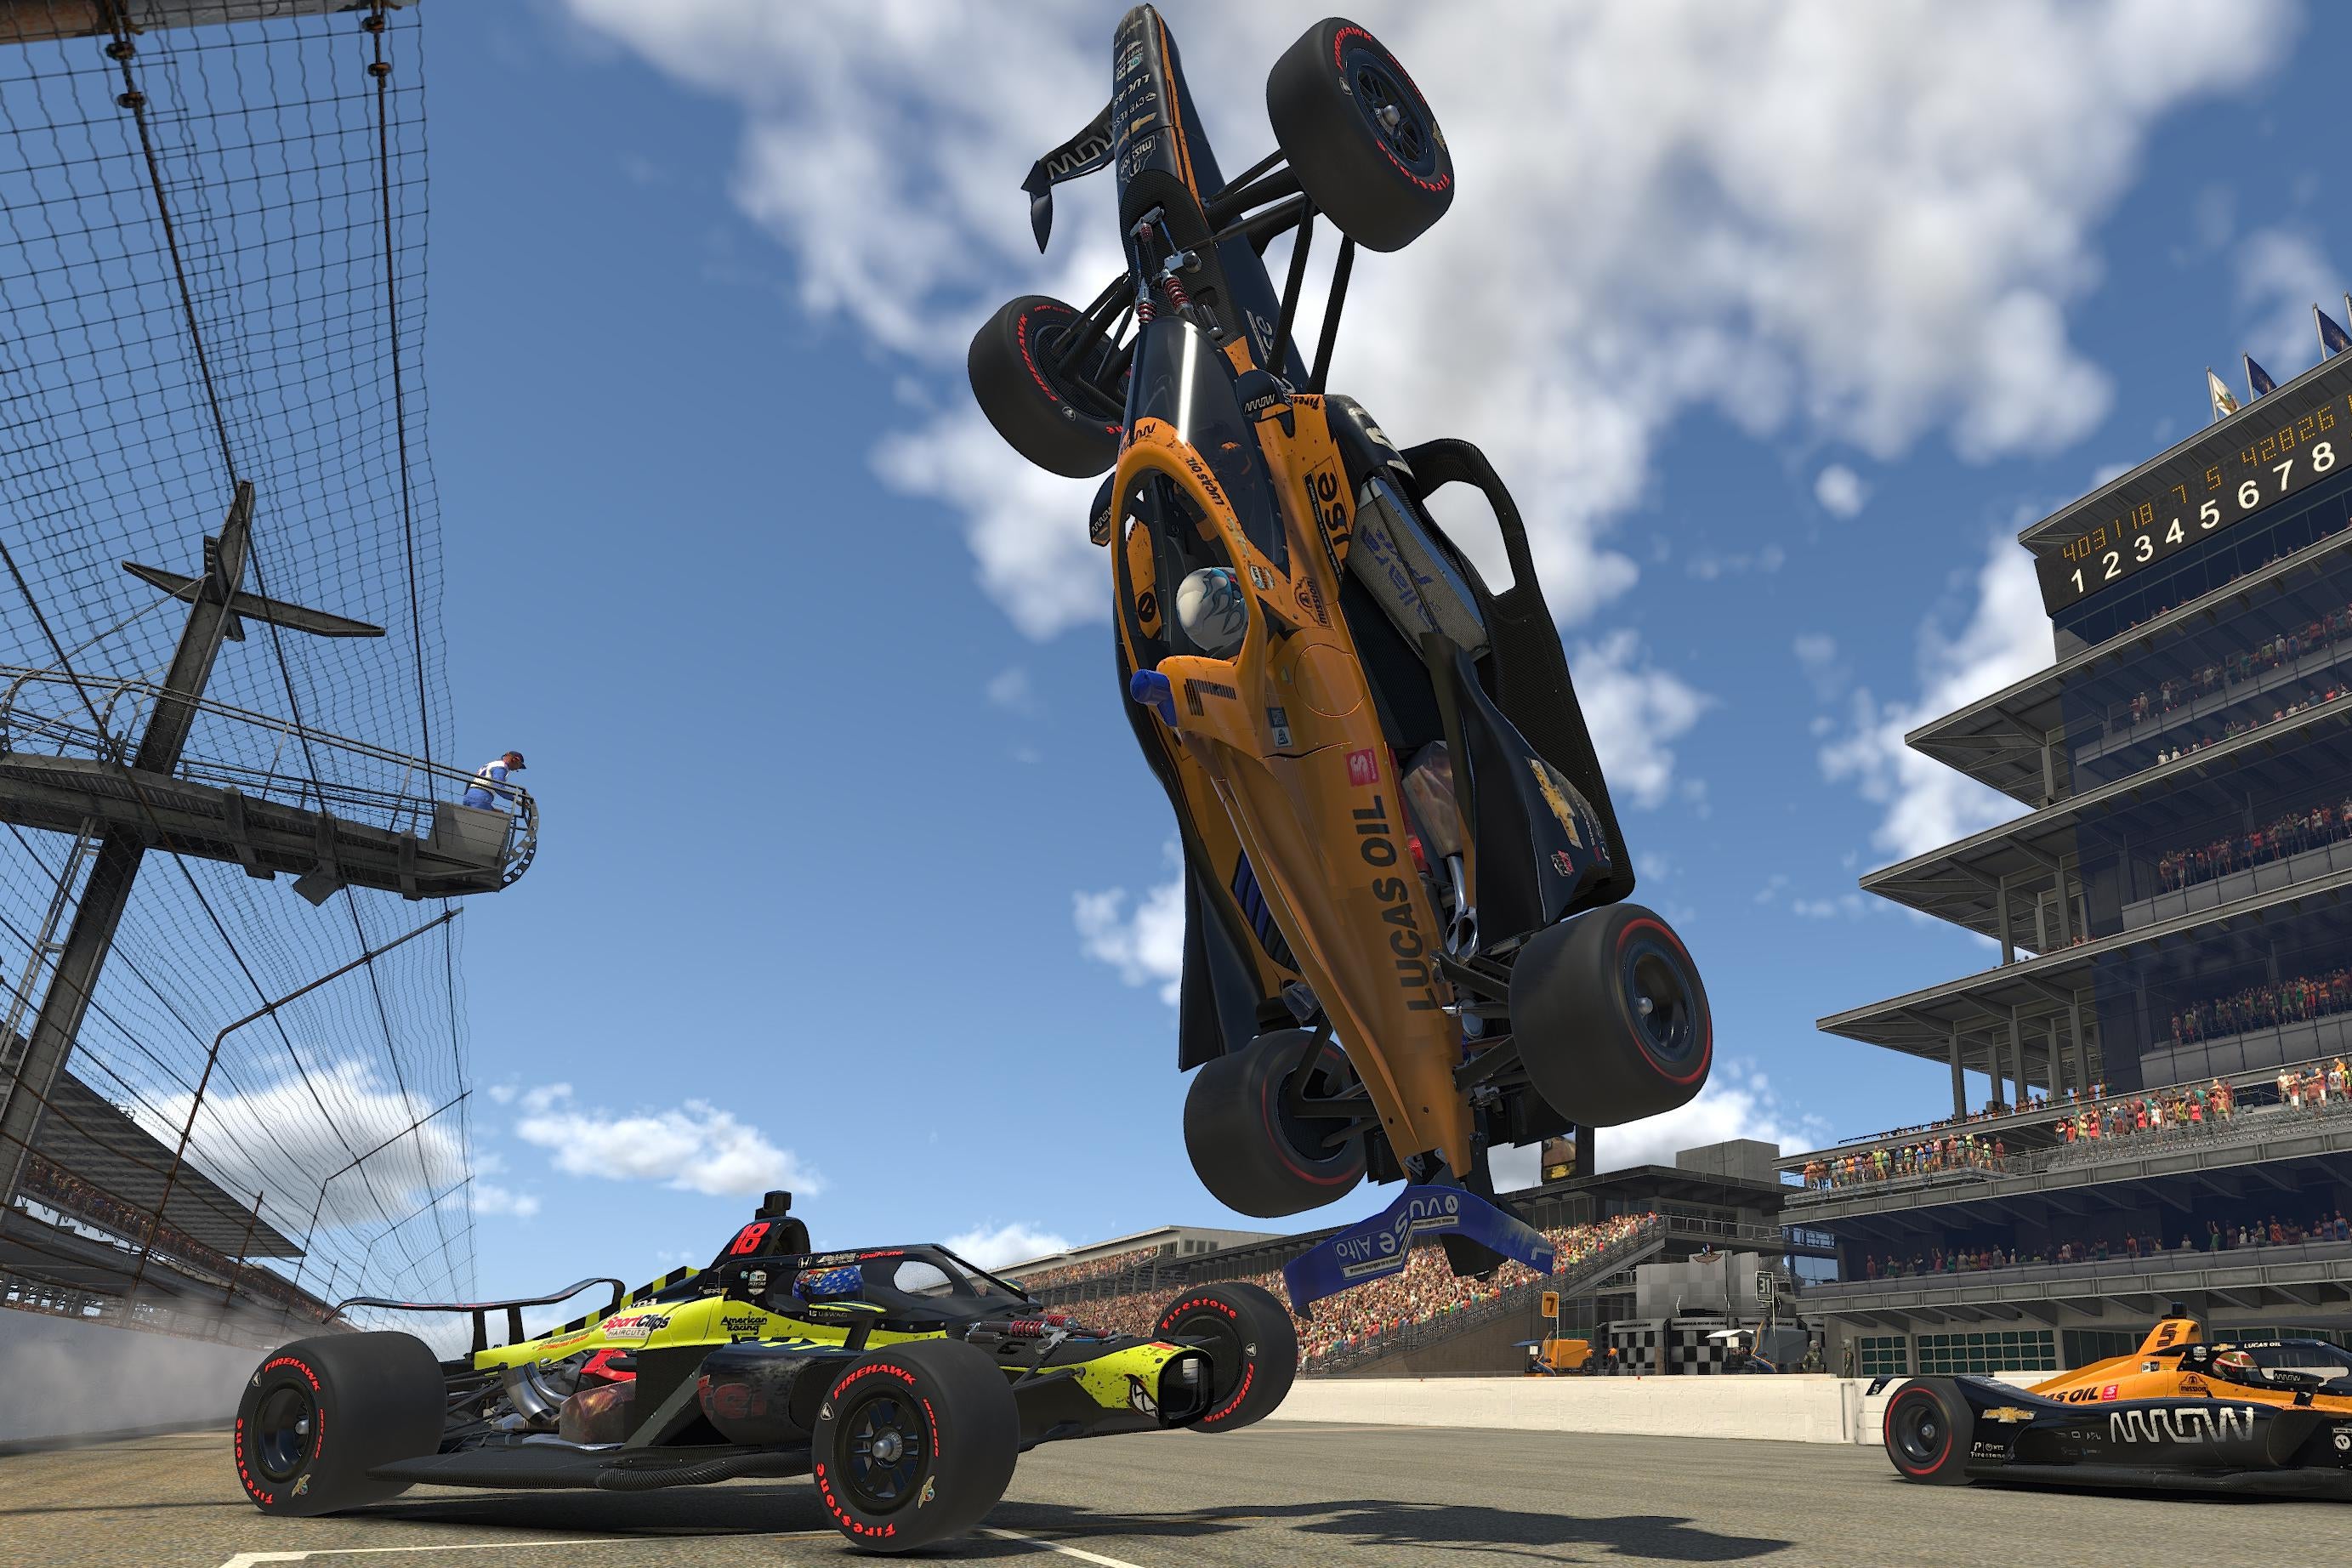 A virtual car spins and flips over another car on a racetrack.